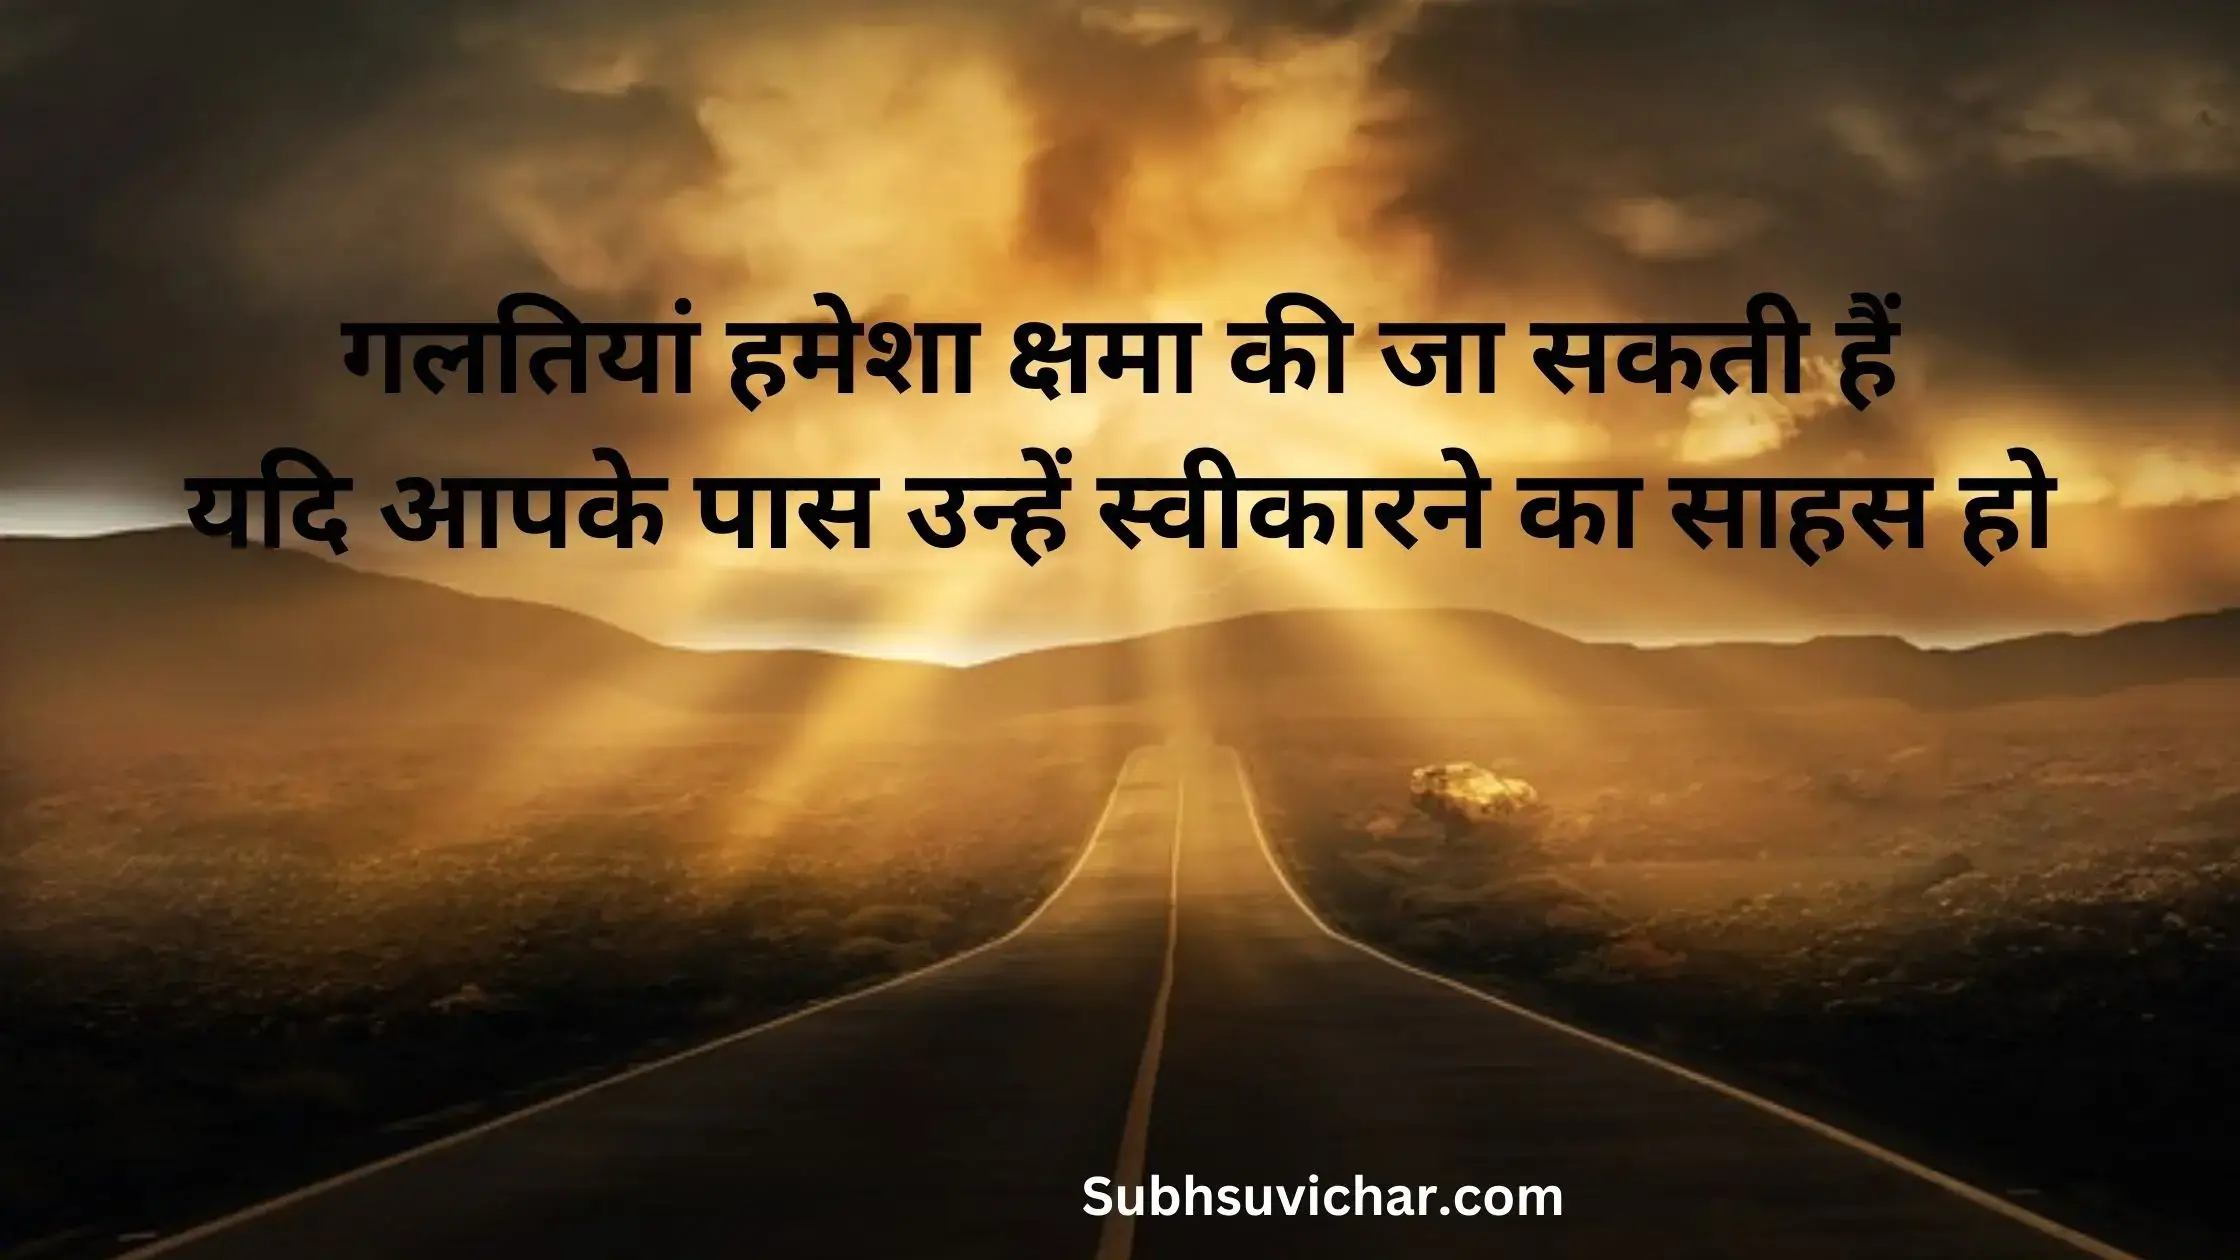 This post contains huge collection of whatsaap suvichar in hindi font with high quality images for your whatsaap and facebook status.